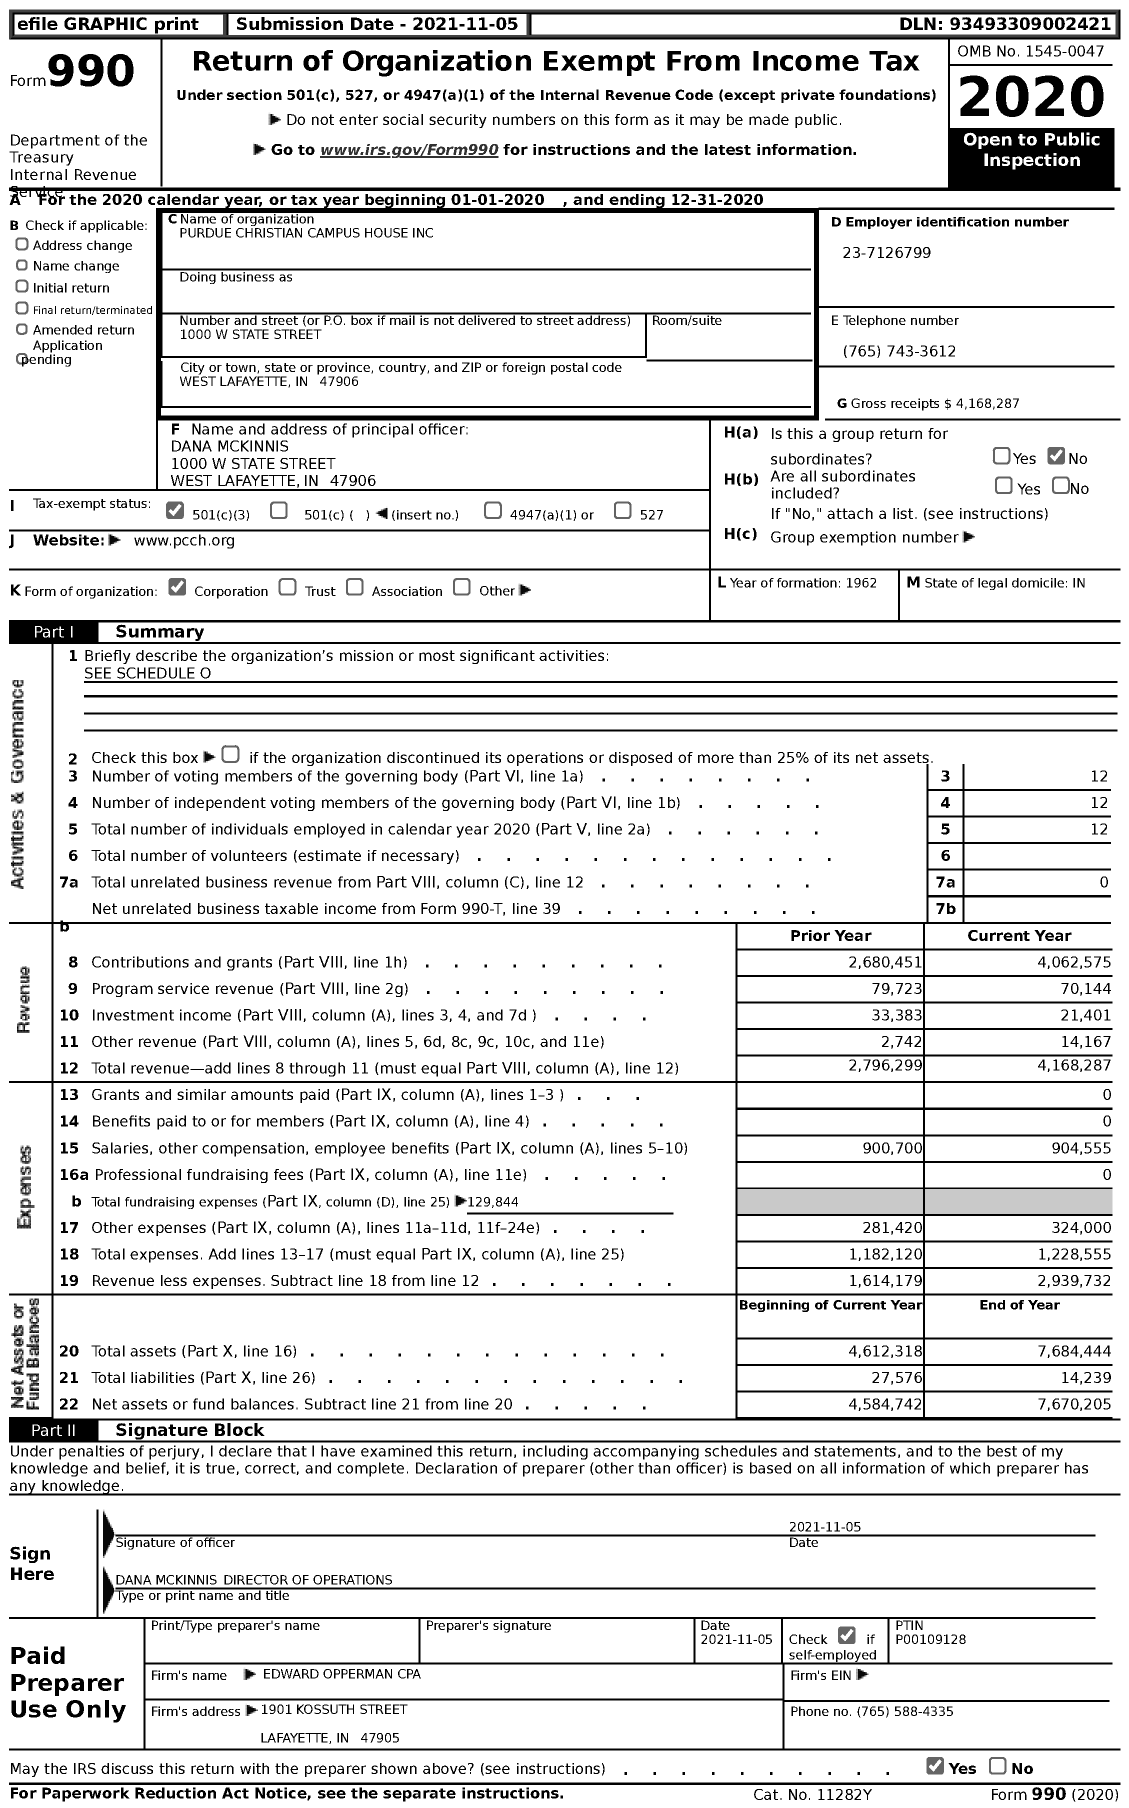 Image of first page of 2020 Form 990 for Purdue Christian Campus House